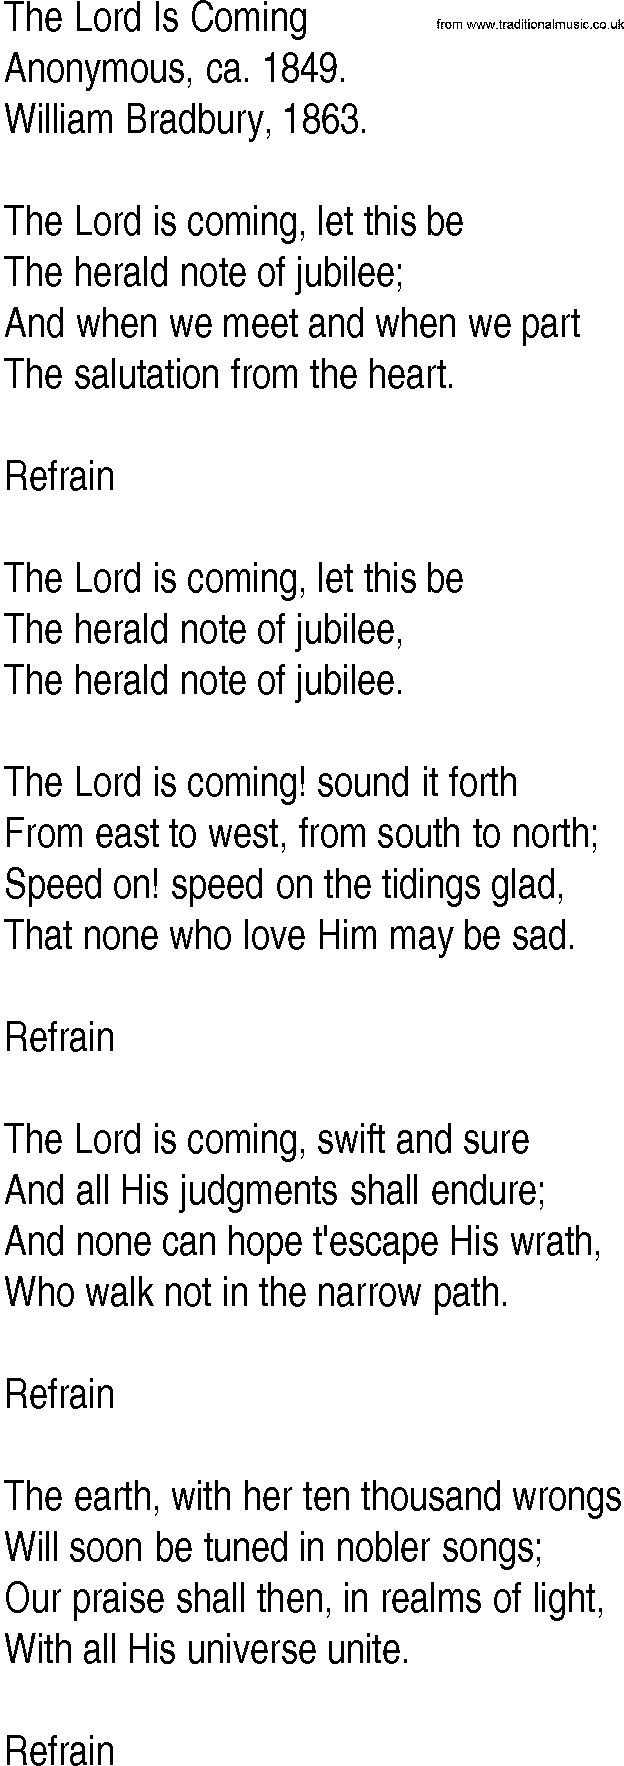 Hymn and Gospel Song: The Lord Is Coming by Anonymous ca lyrics